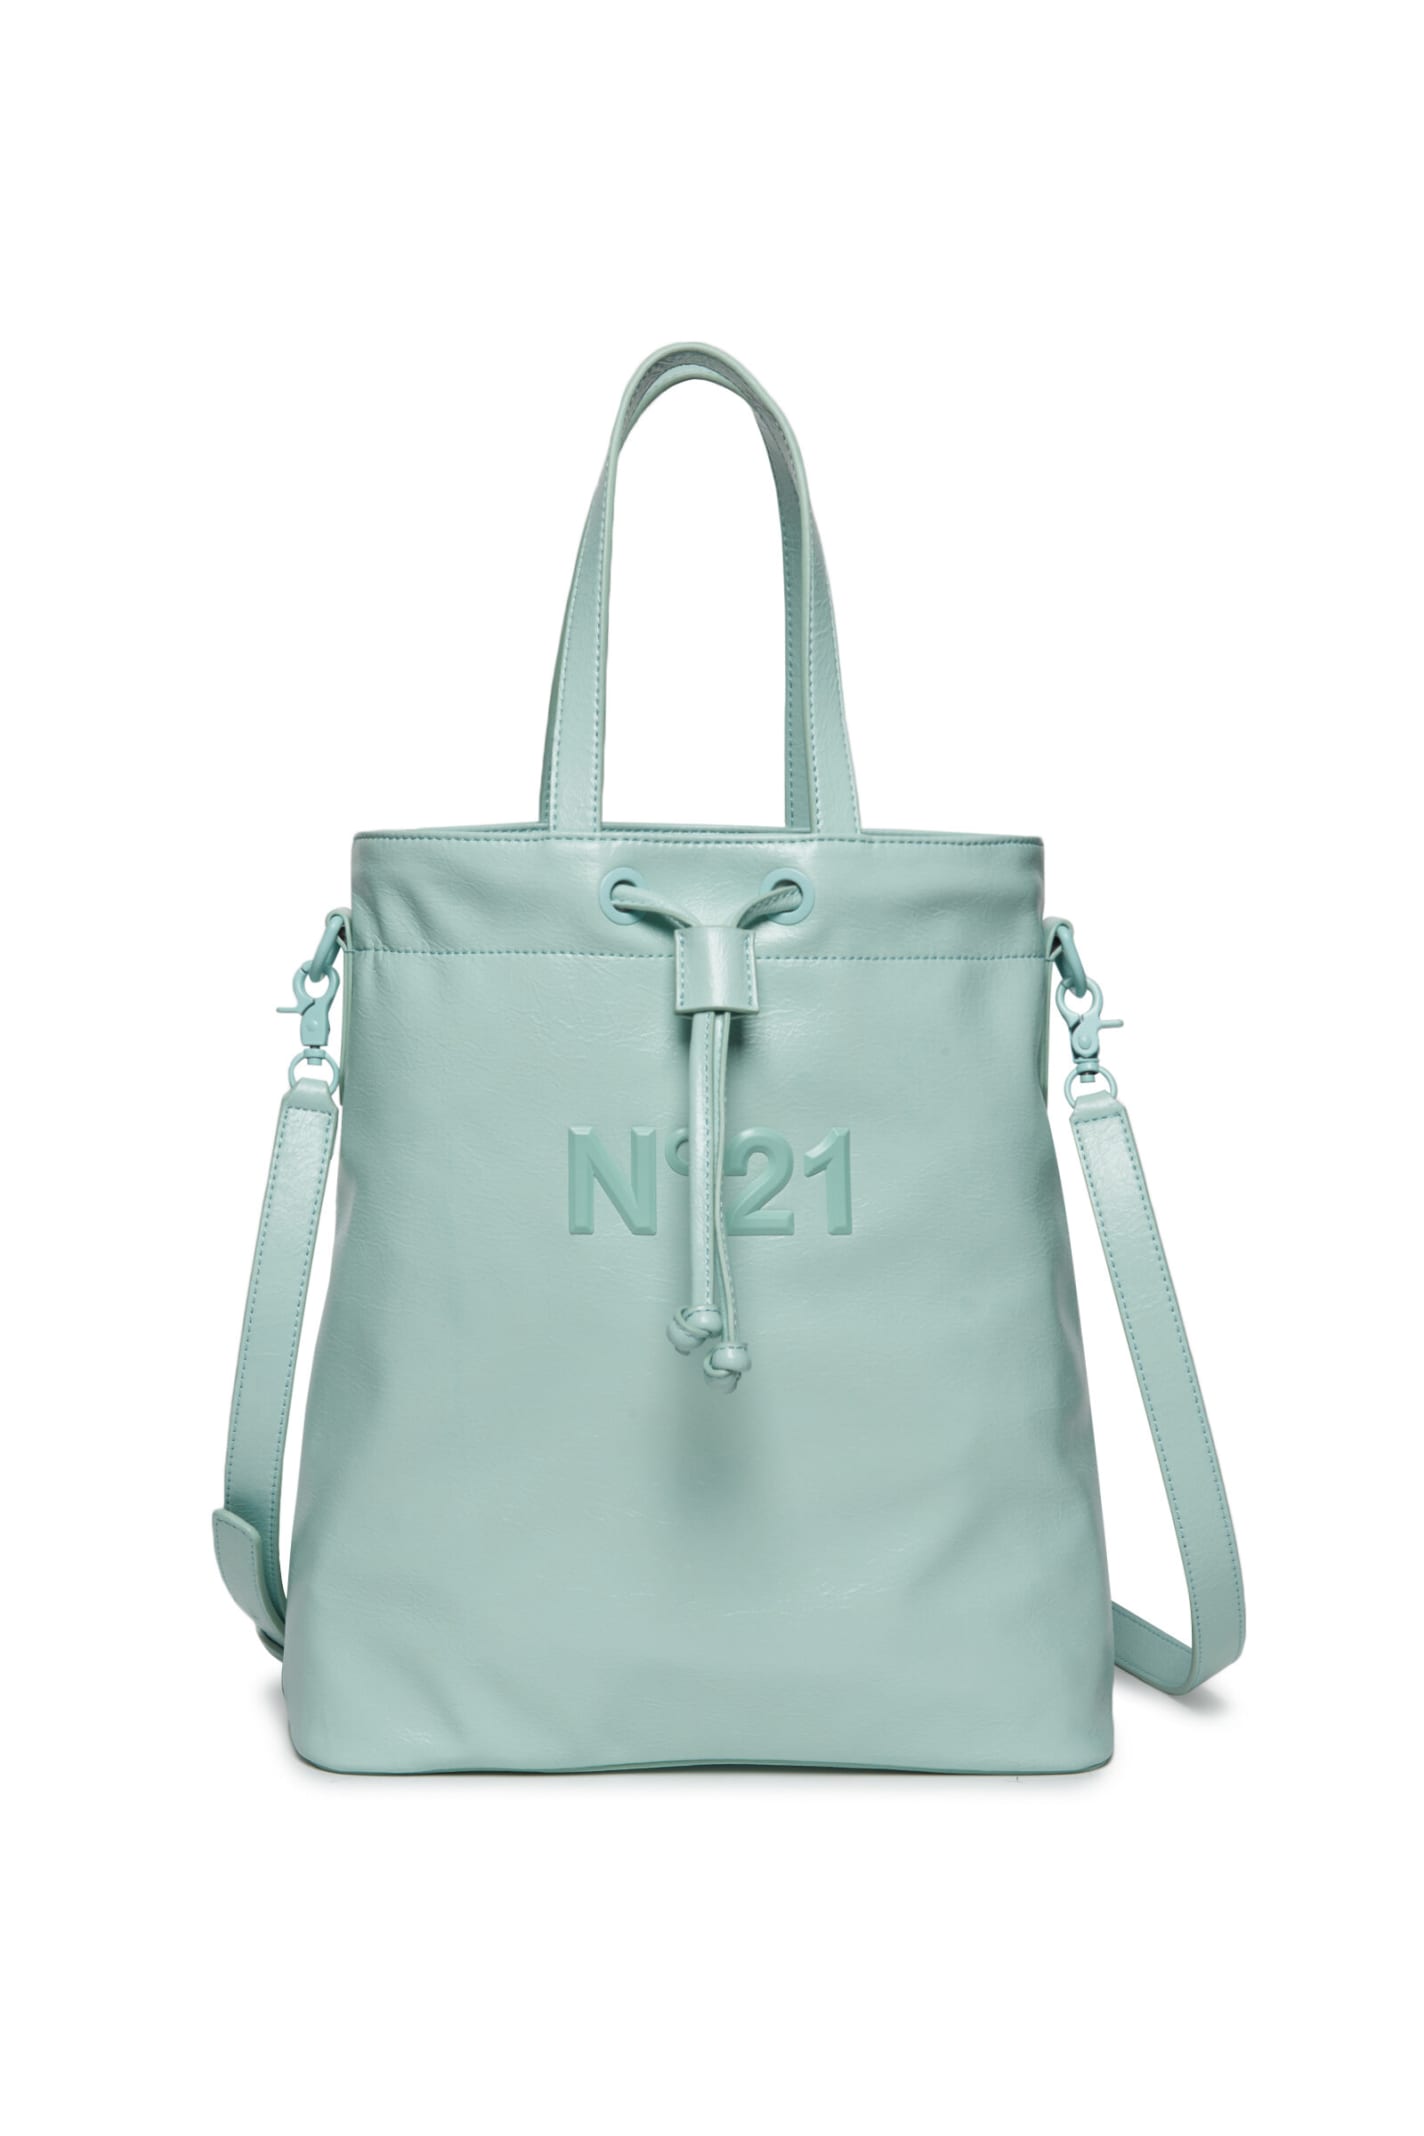 N.21 N21w30f Bags N°21 Mint Green Bucket Bag In Leatherette With Handles And Shoulder Strap